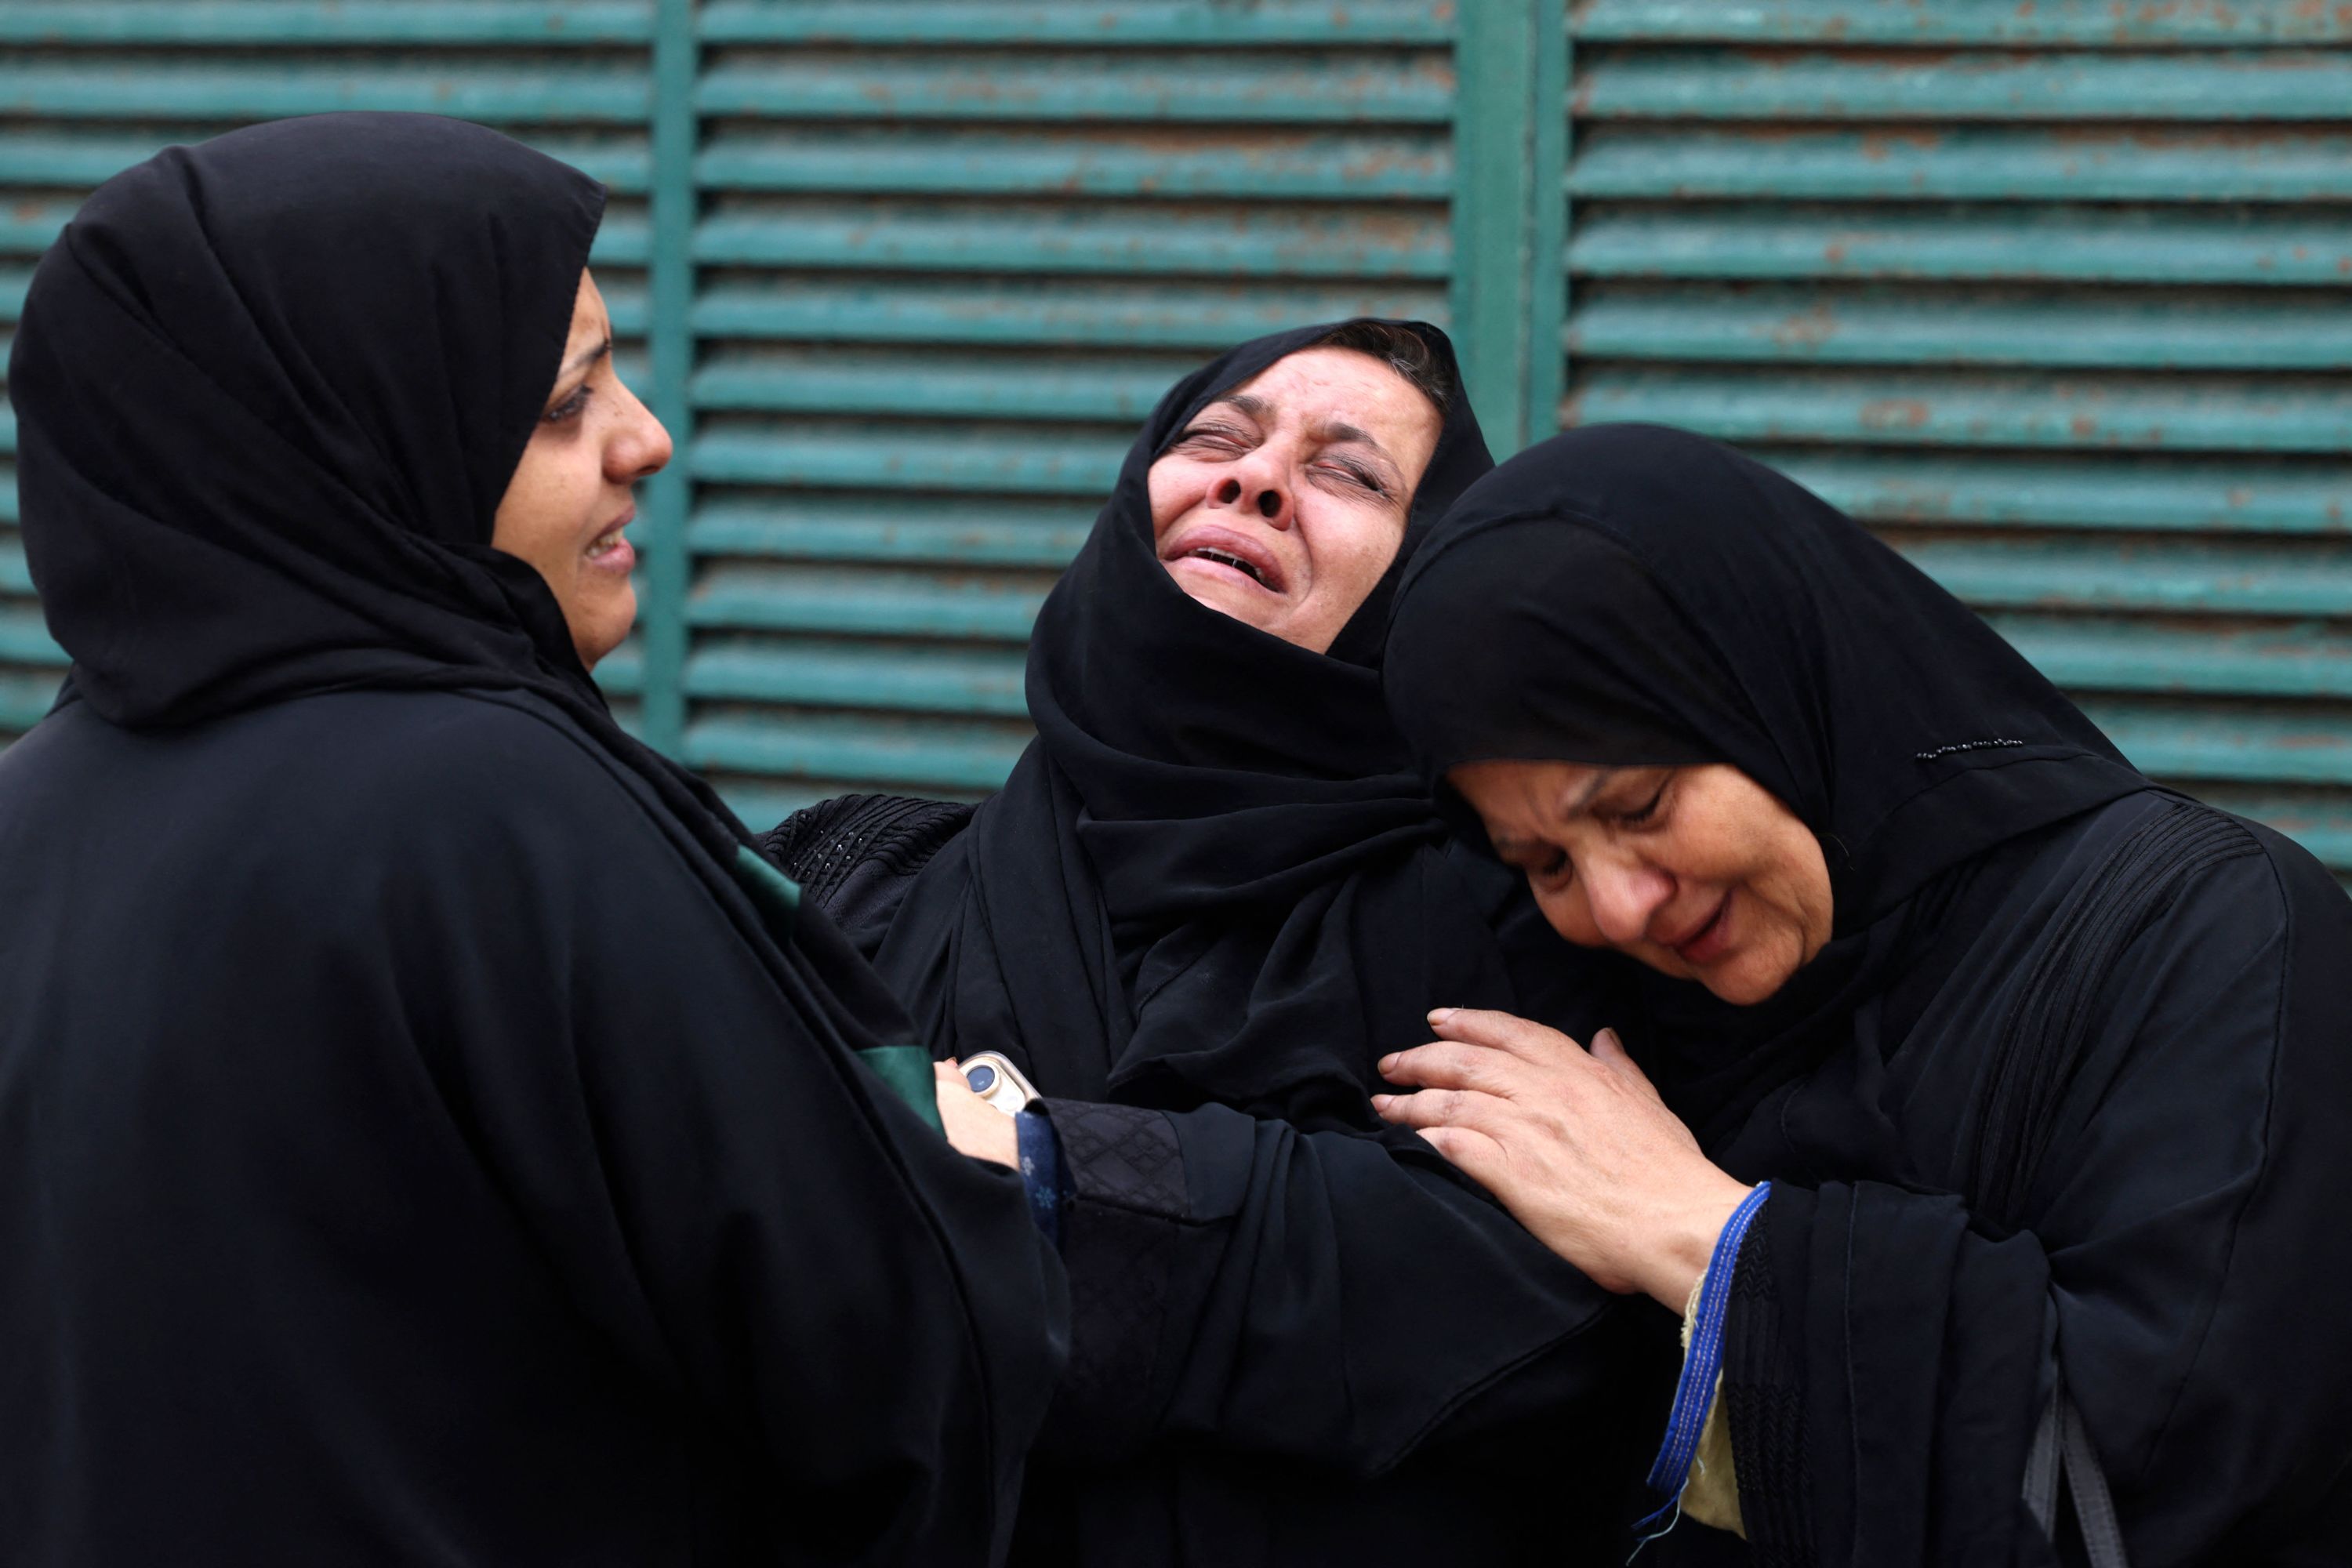 Palestinians mourn during the funeral of a relative killed in an Israeli strike, in Gaza City on October 10.